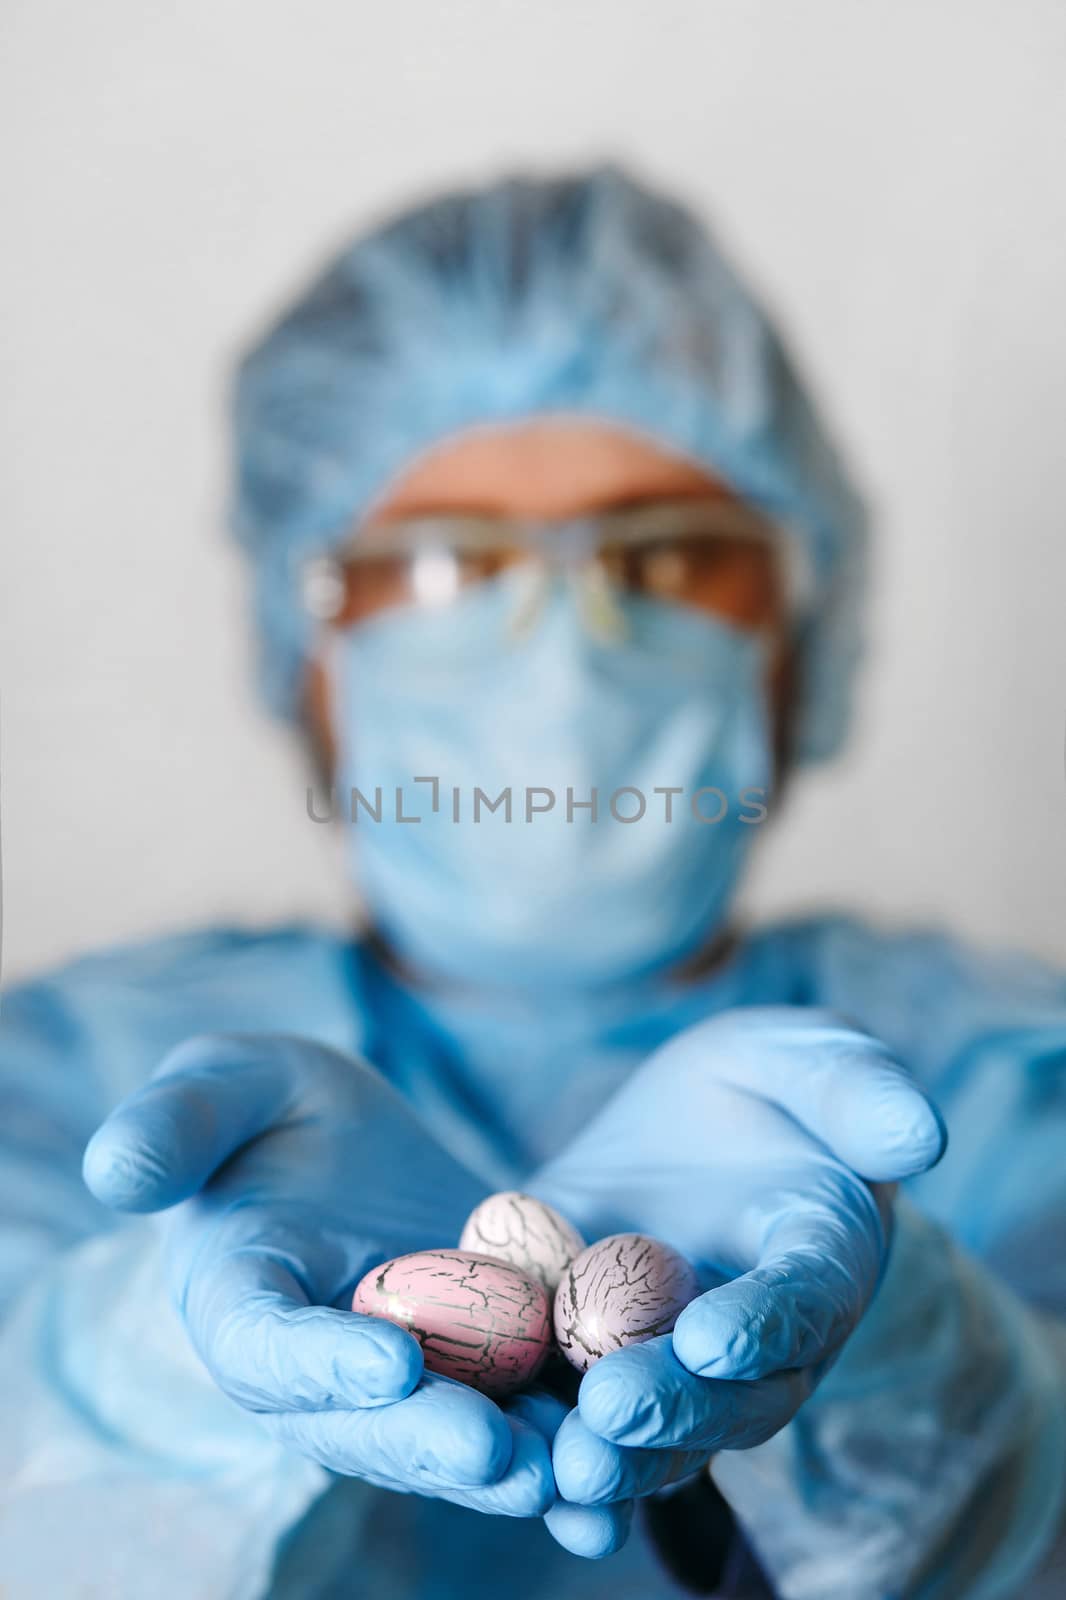 Hands in medical gloves holding modern painted easter eggs. Selective focus. Toned picture.